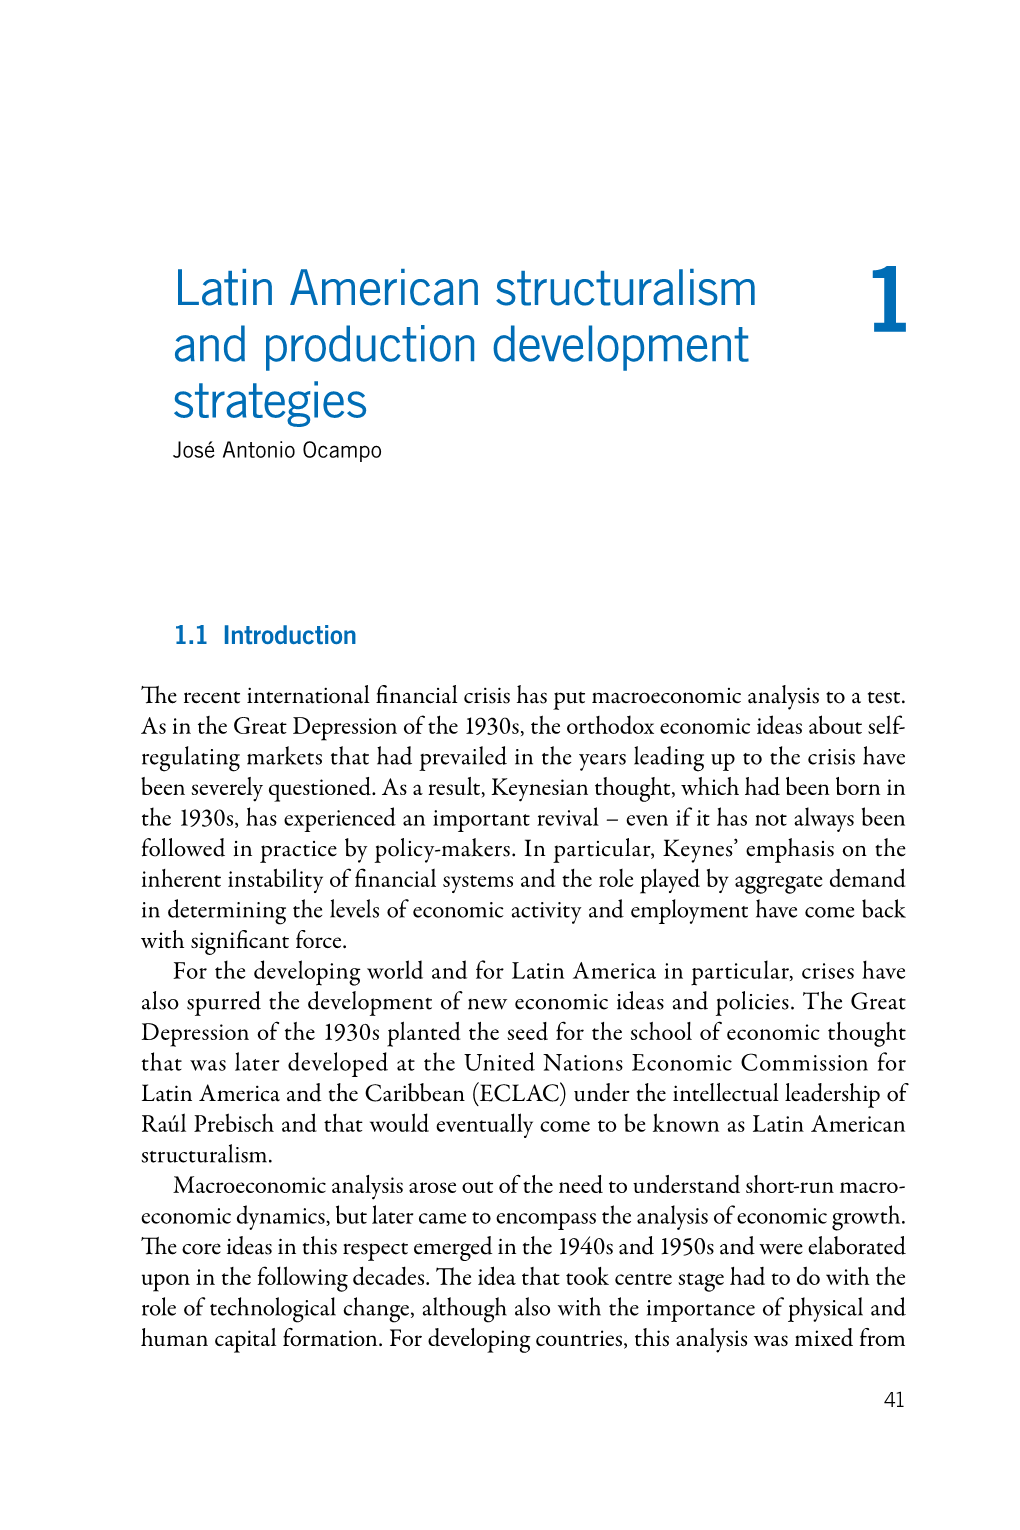 Latin American Structuralism and Production Development Strategies